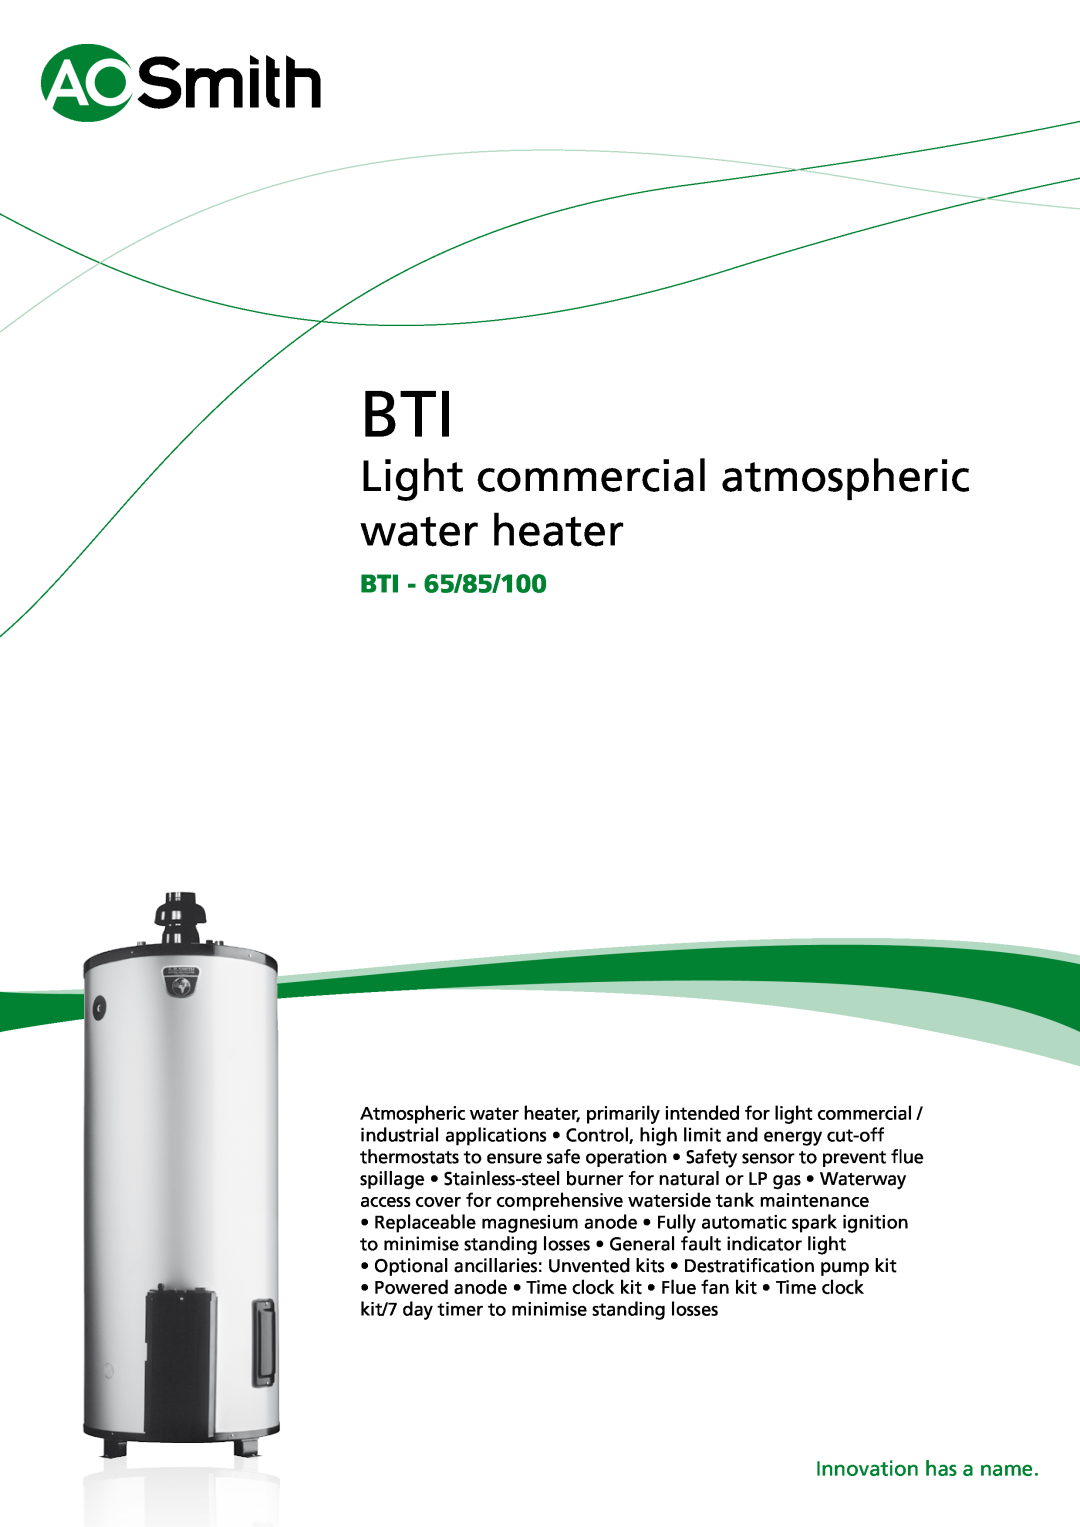 A.O. Smith BTI - 85 manual Light commercial atmospheric water heater, BTI - 65/85/100, Innovation has a name 